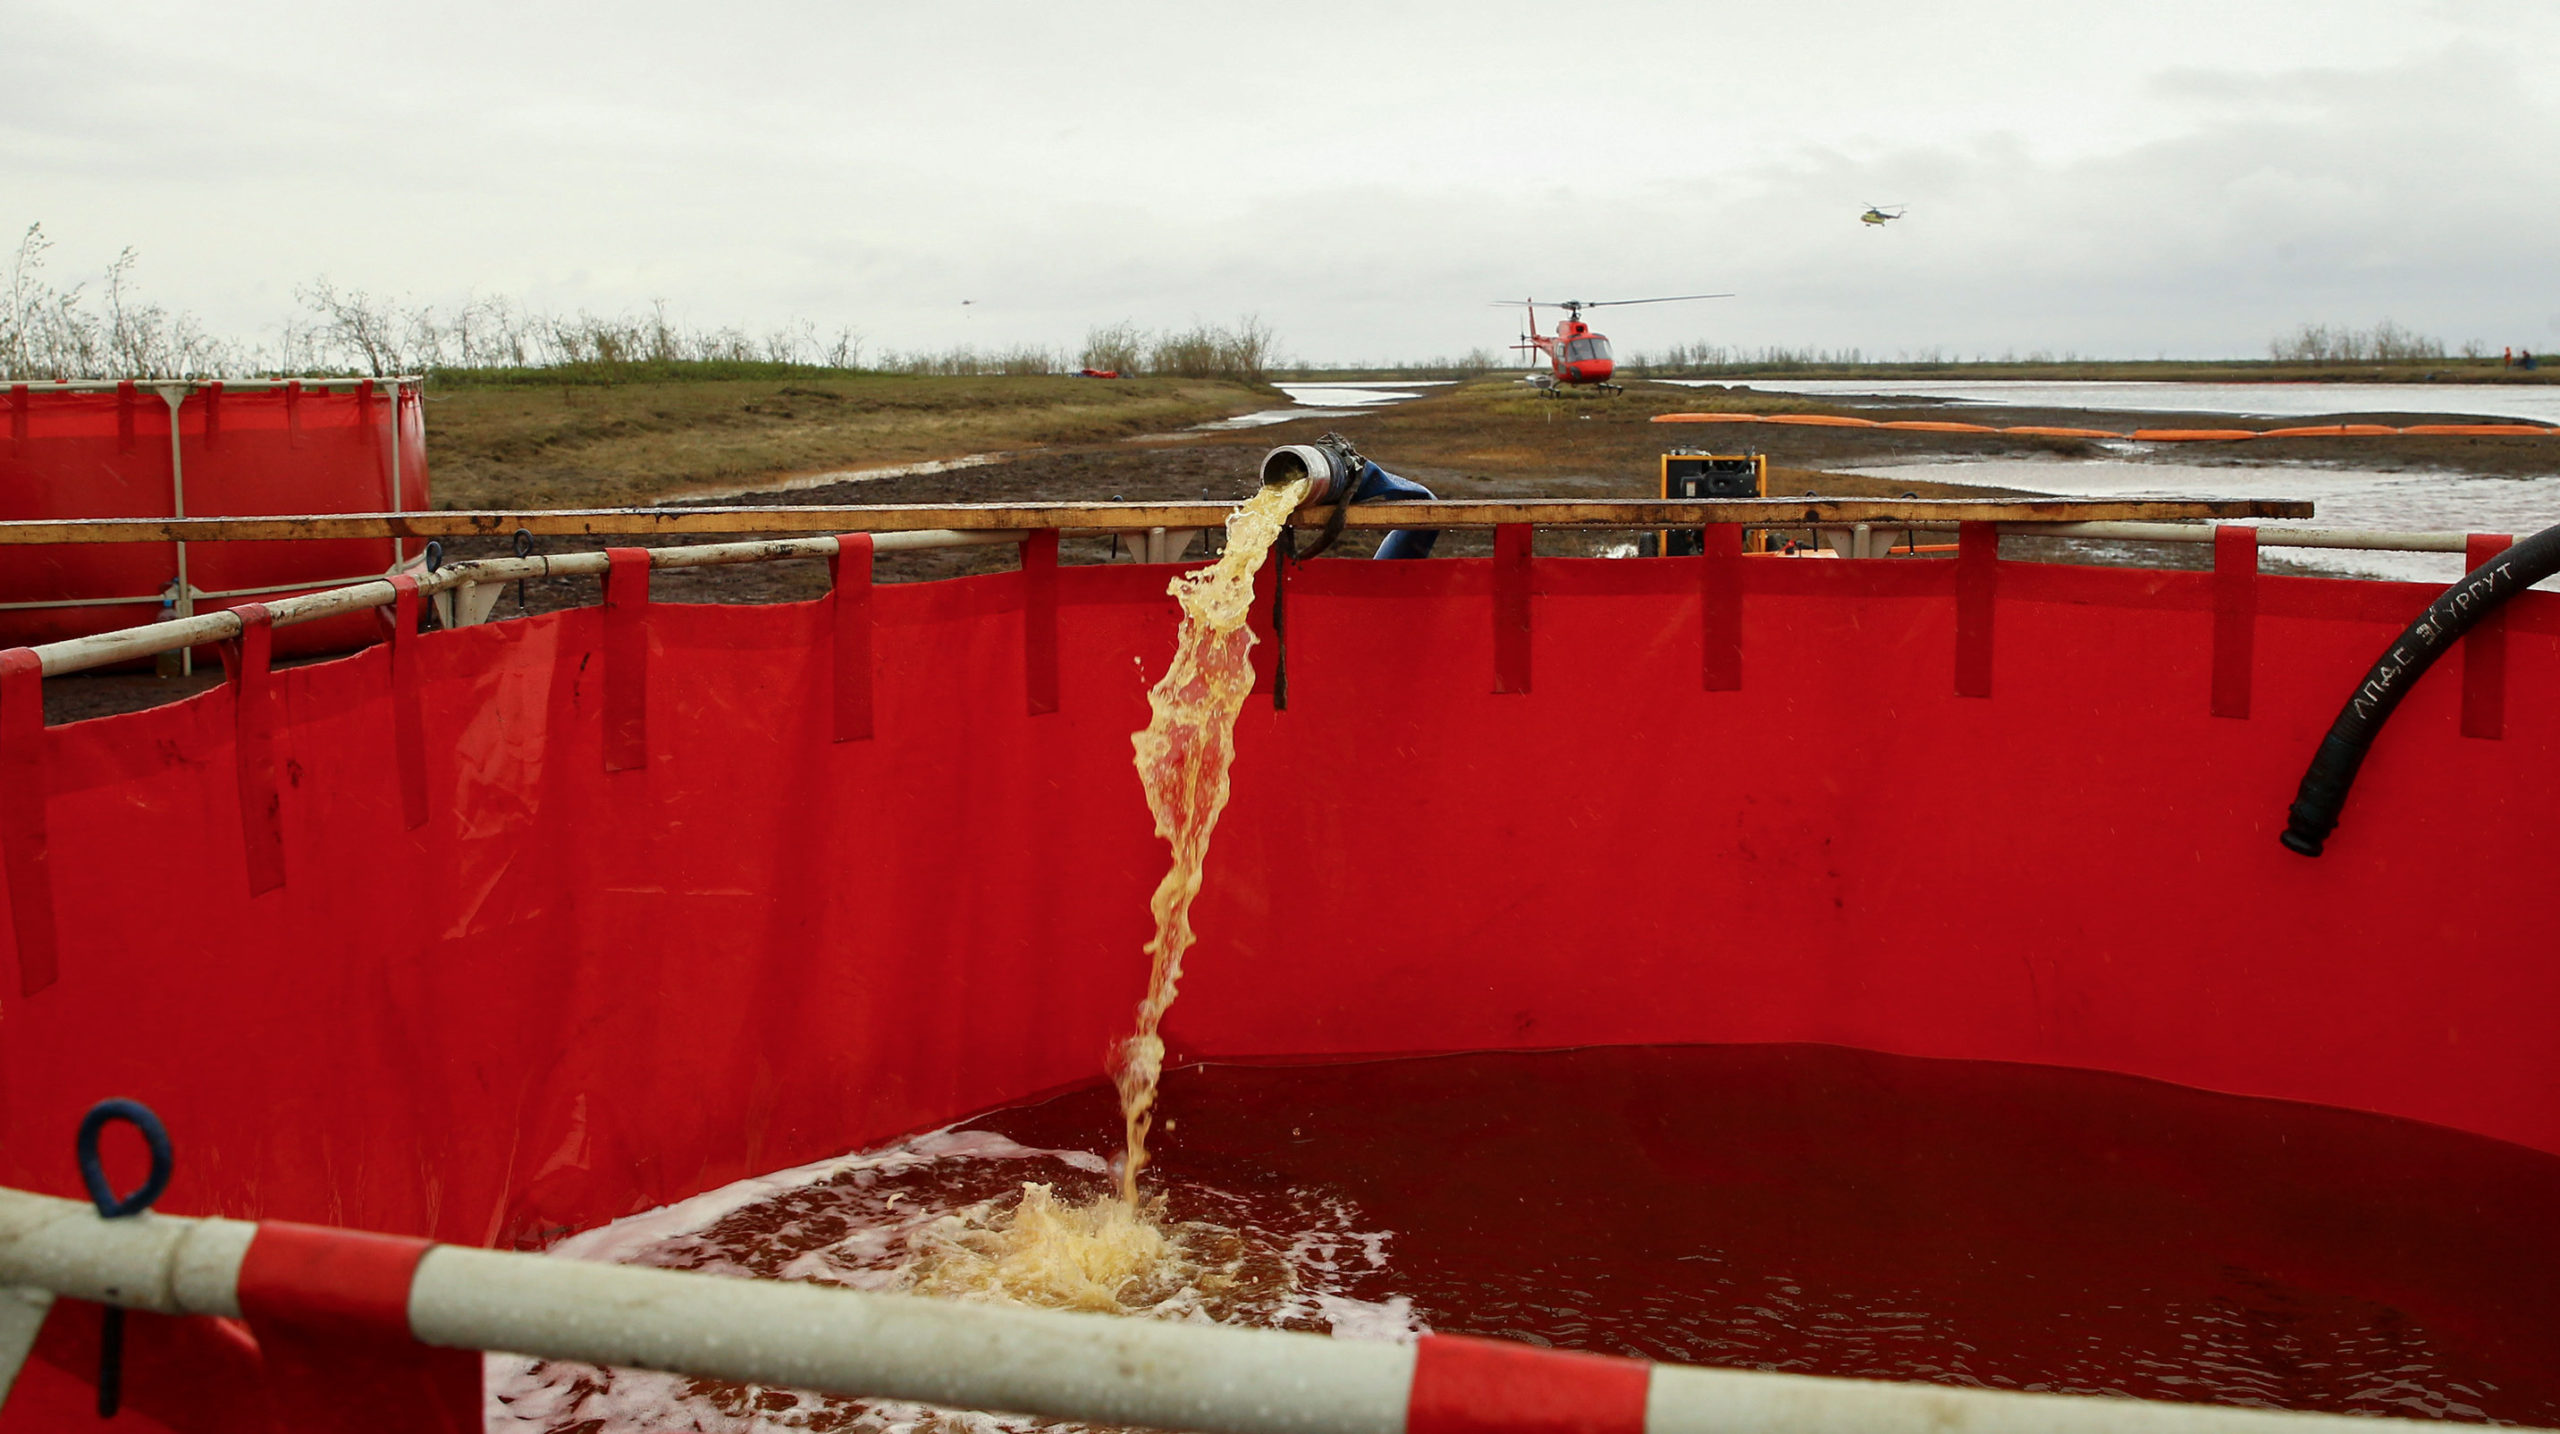 Spilled diesel fuel dredged from the river being poured into containment tanks.  (Image: Getty)